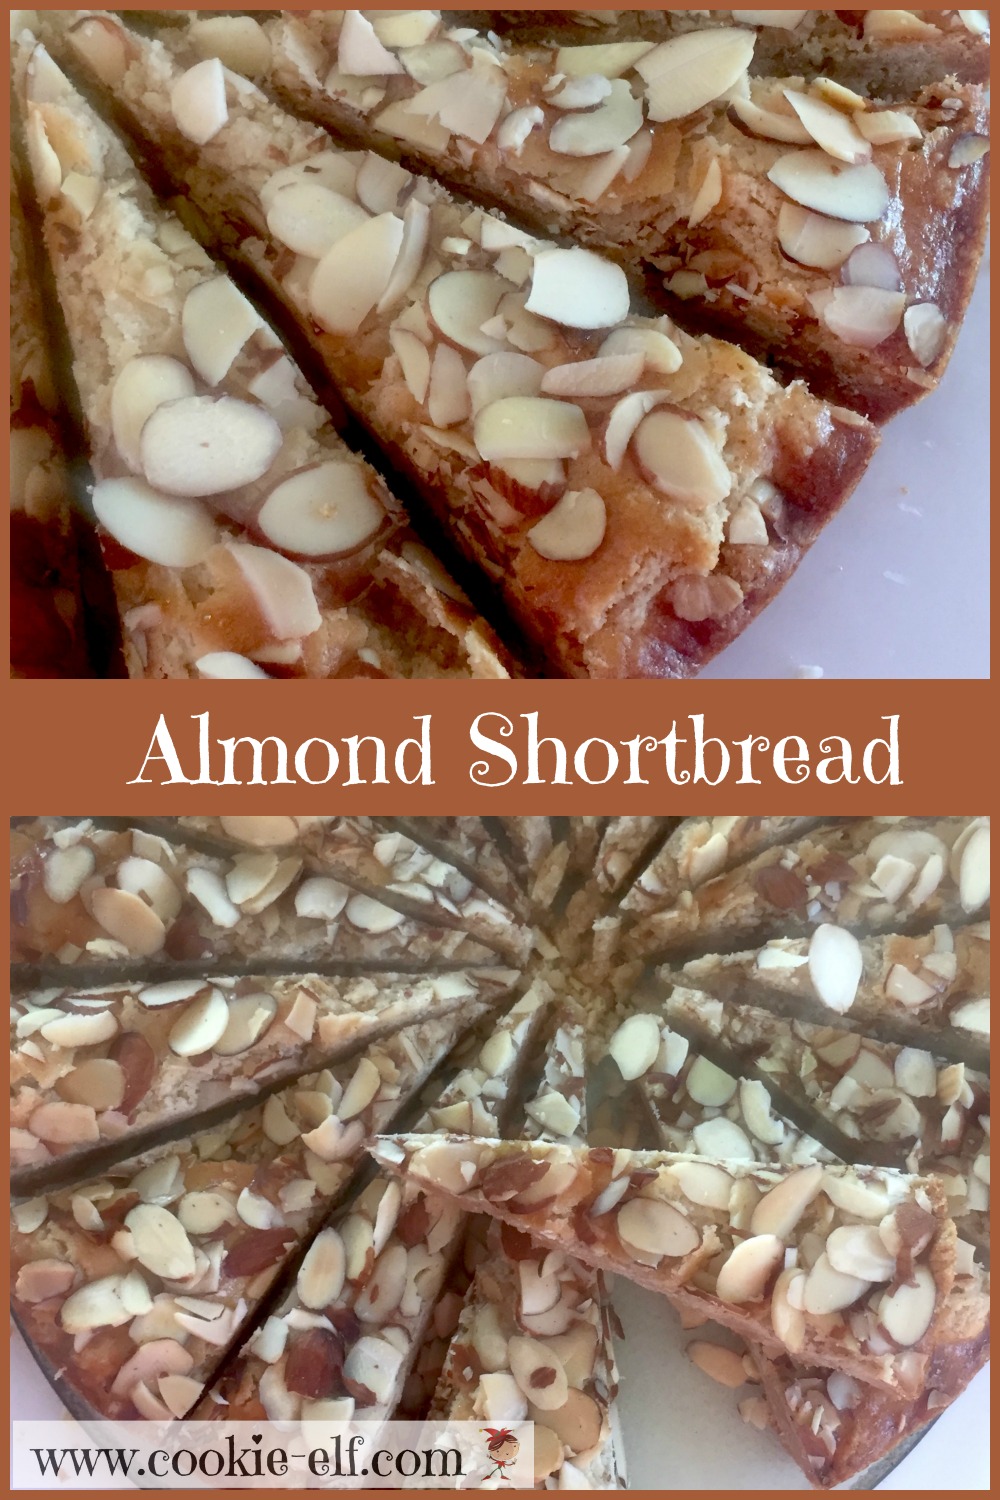 Almond Shortbread with The Cookie Elf